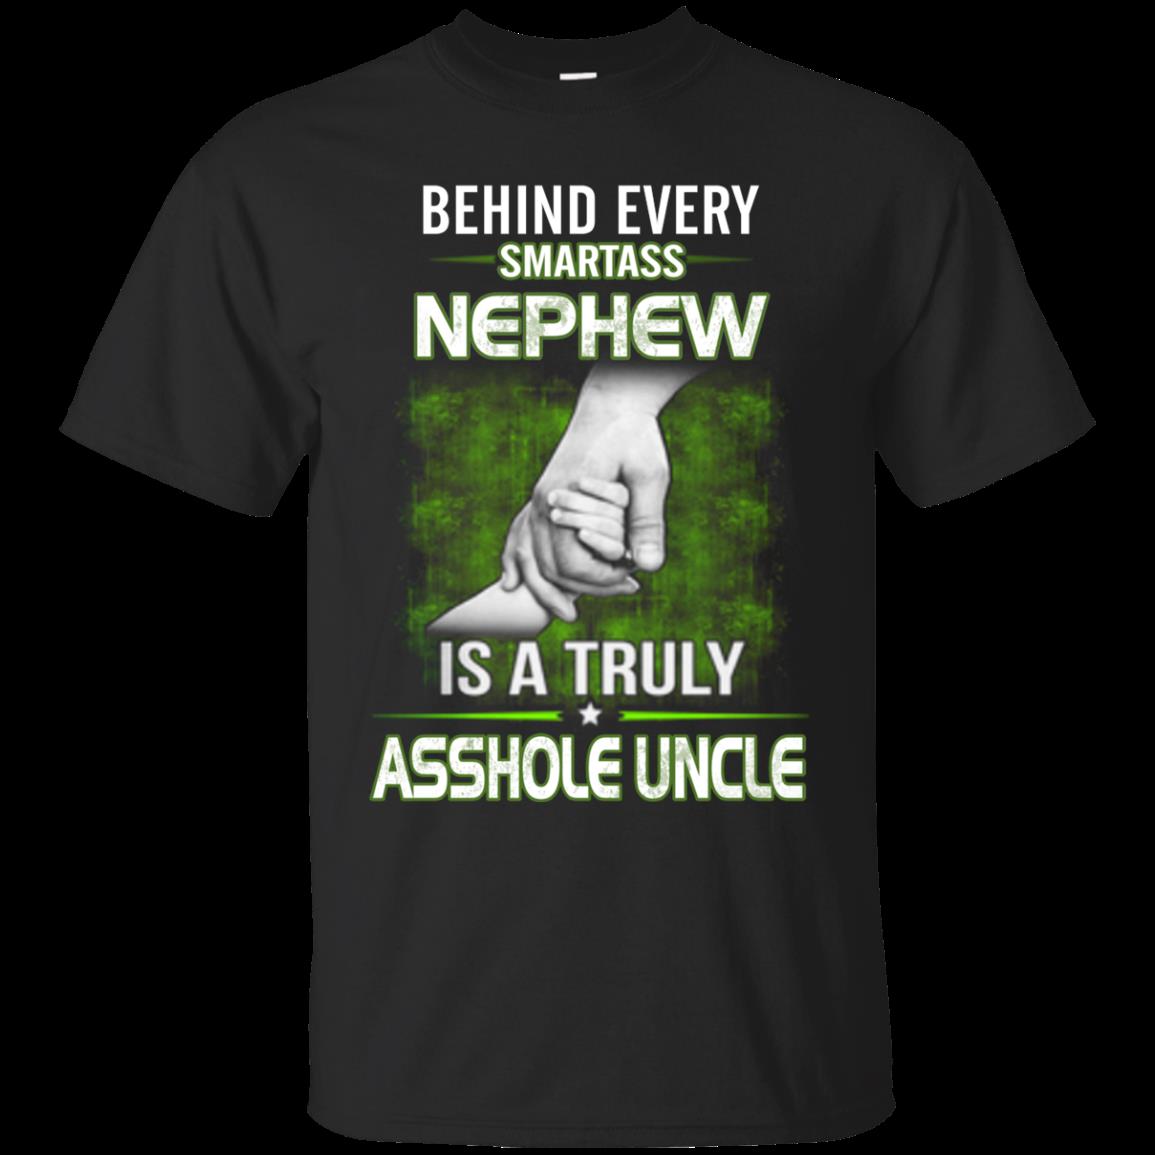 Behind Every Smartass Nephew Is A Truly Asshole Uncle T Shirt Hoodie Sweater